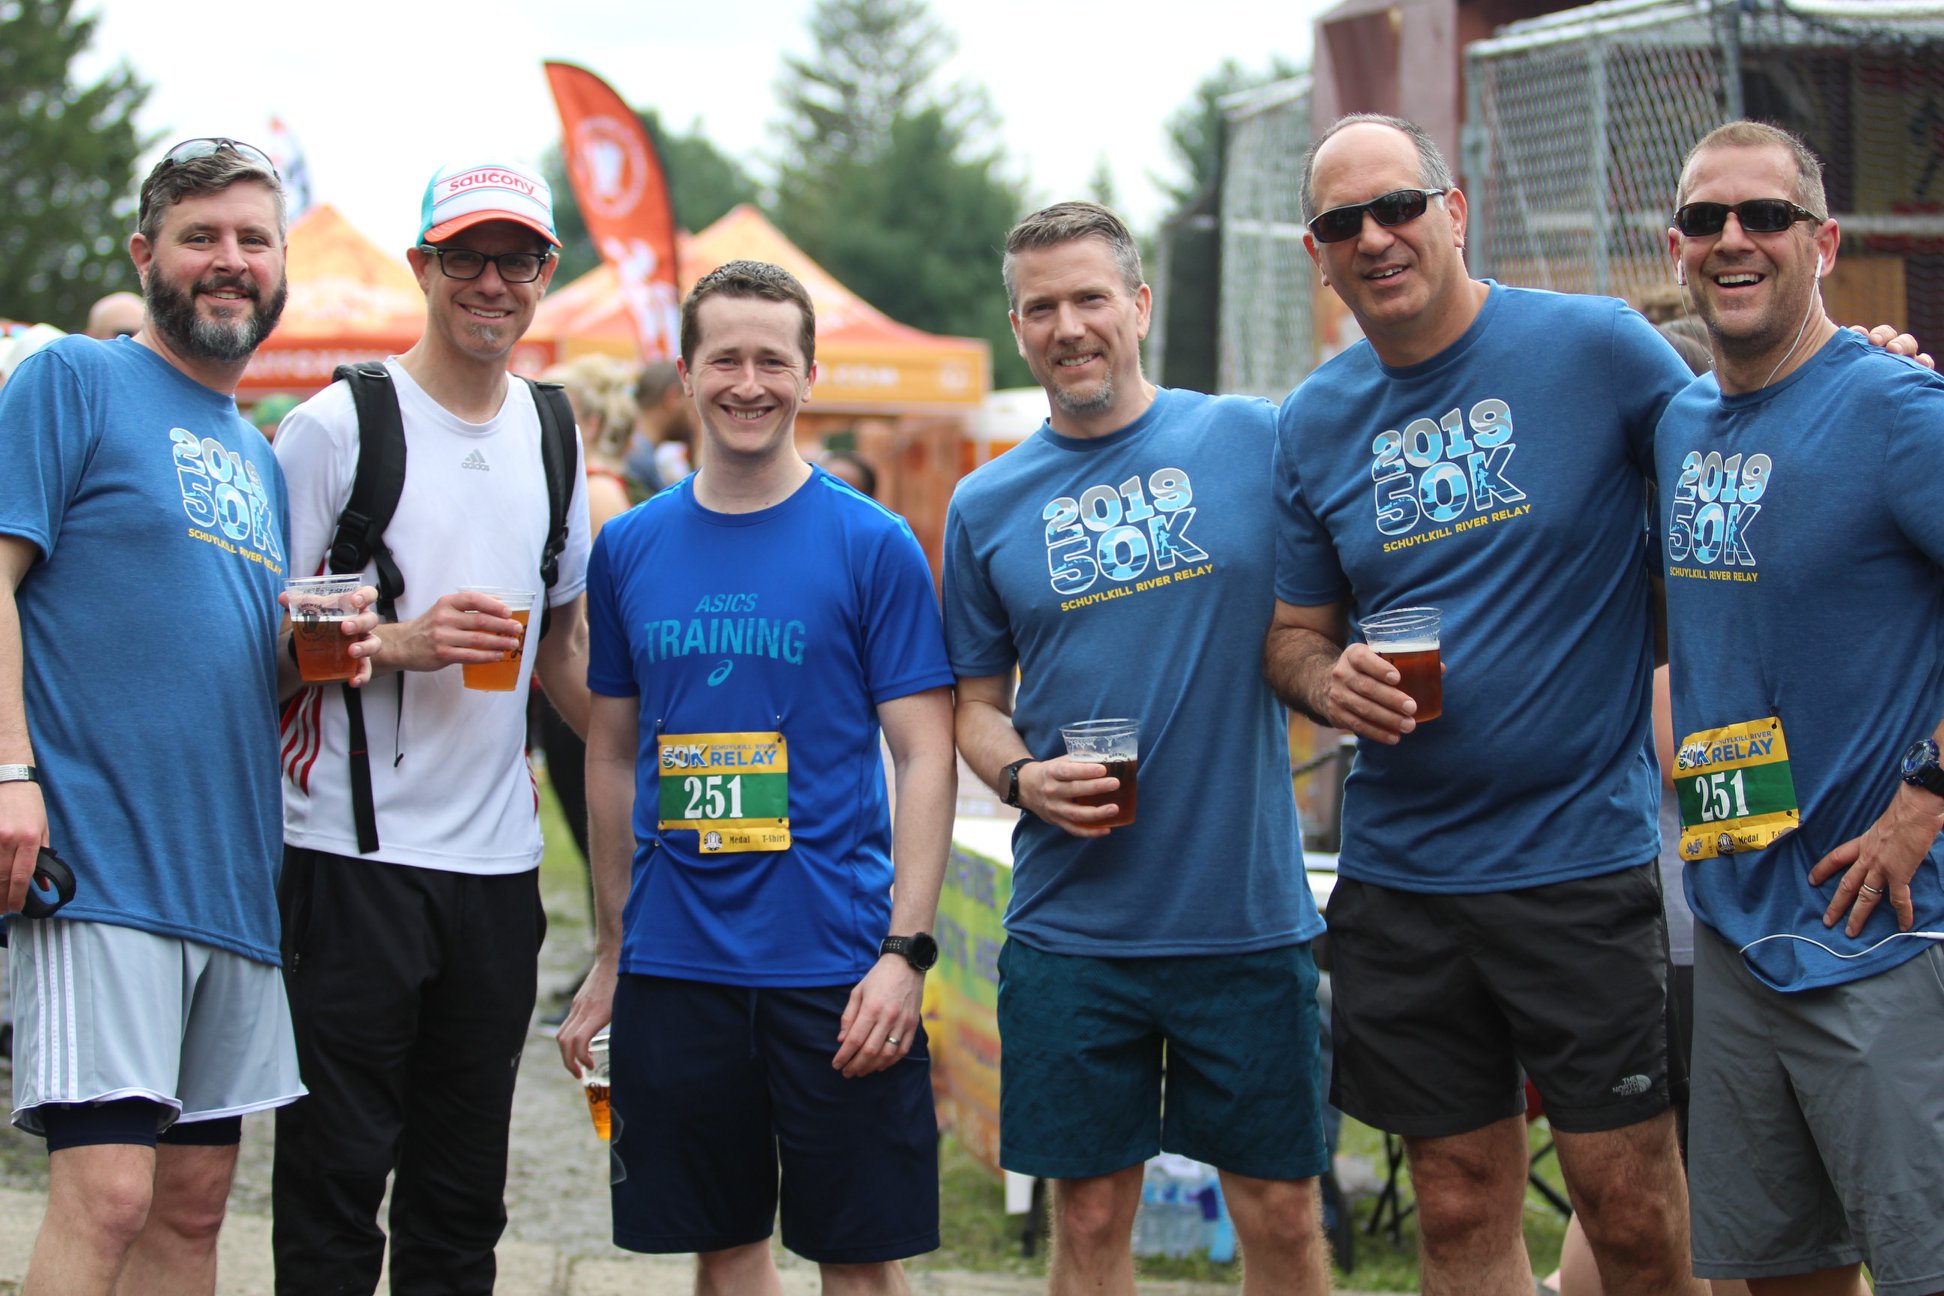 Great American Brewery Runs Schuylkill River Relay 50K Event Support